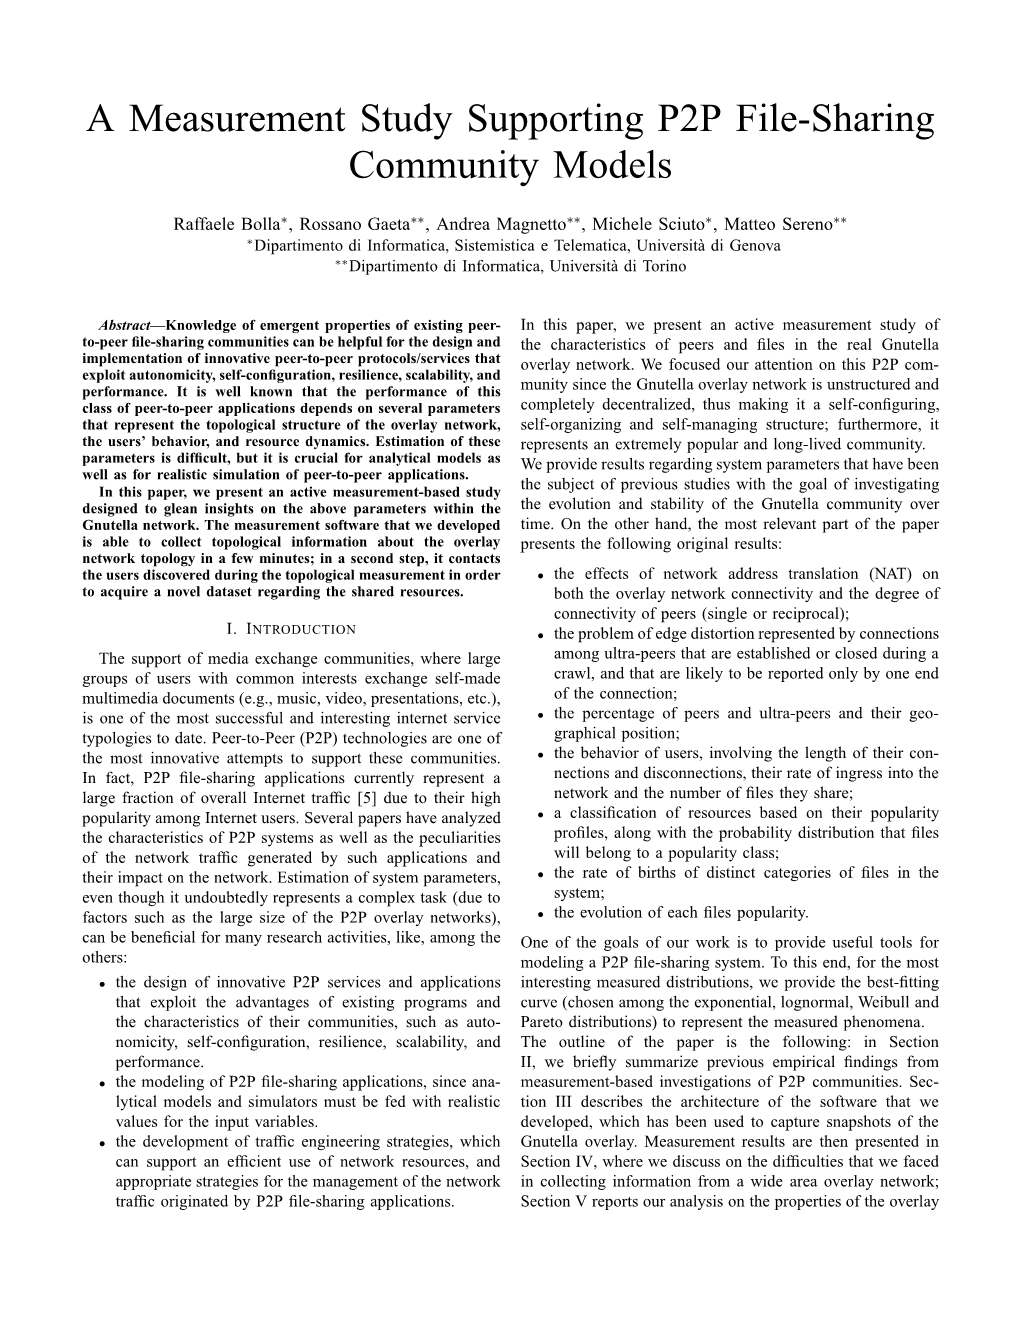 A Measurement Study Supporting P2P File-Sharing Community Models